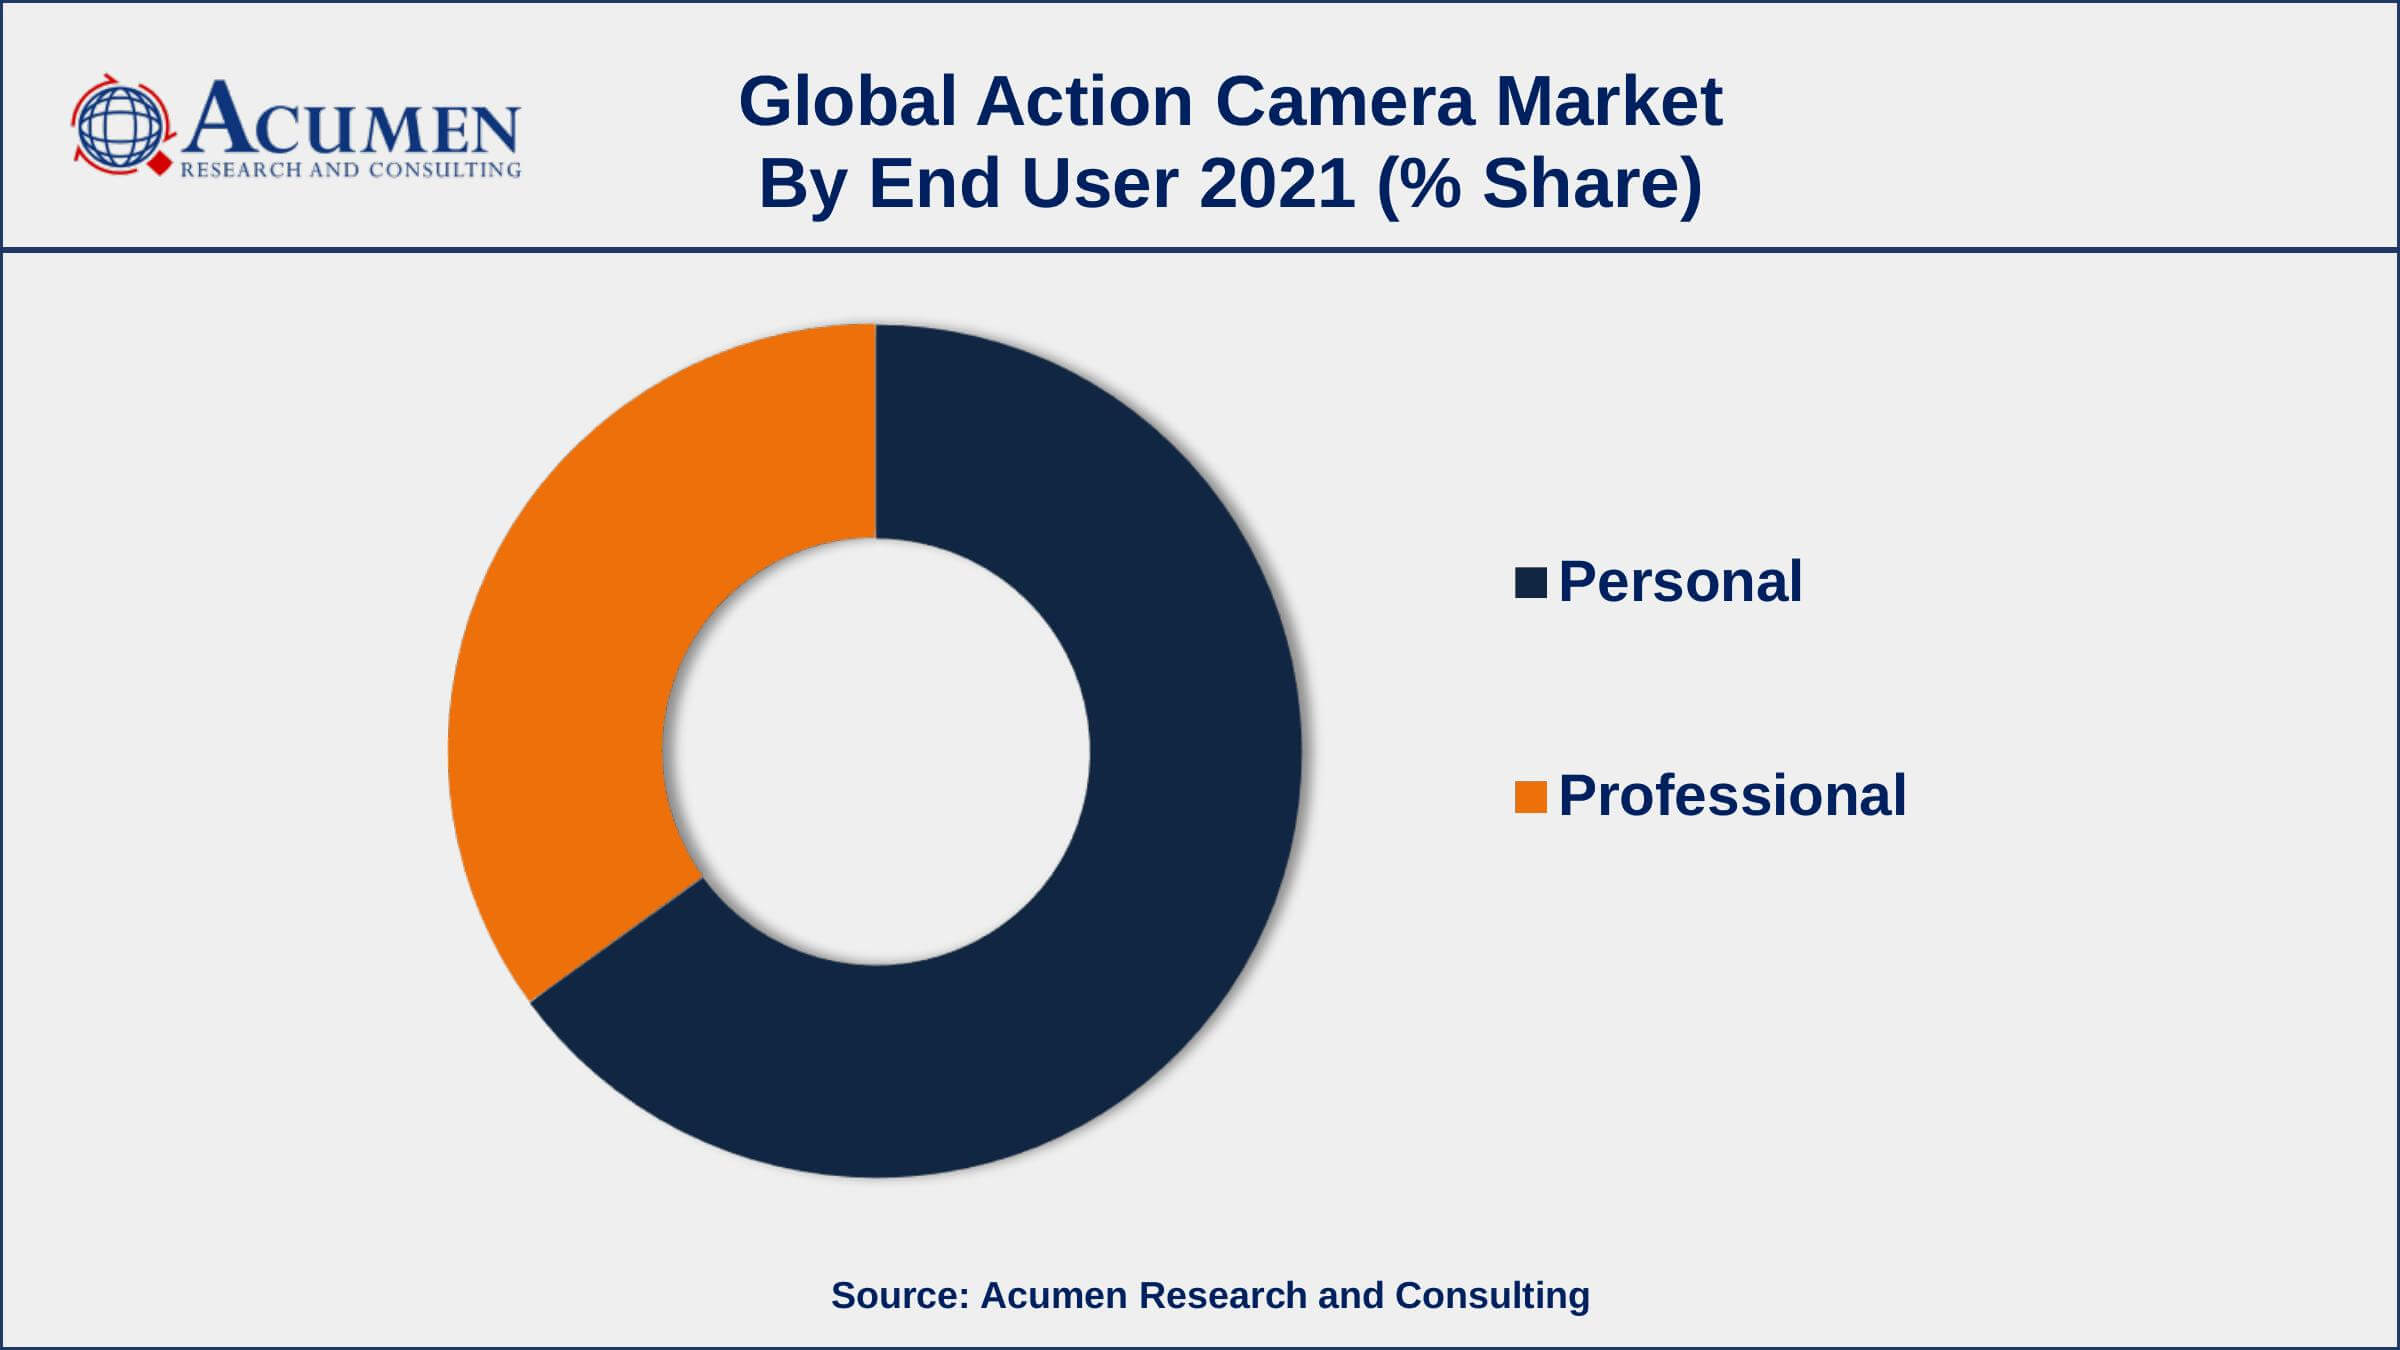 By end user, the personal segment engaged more than 63% of the total market share in 2021